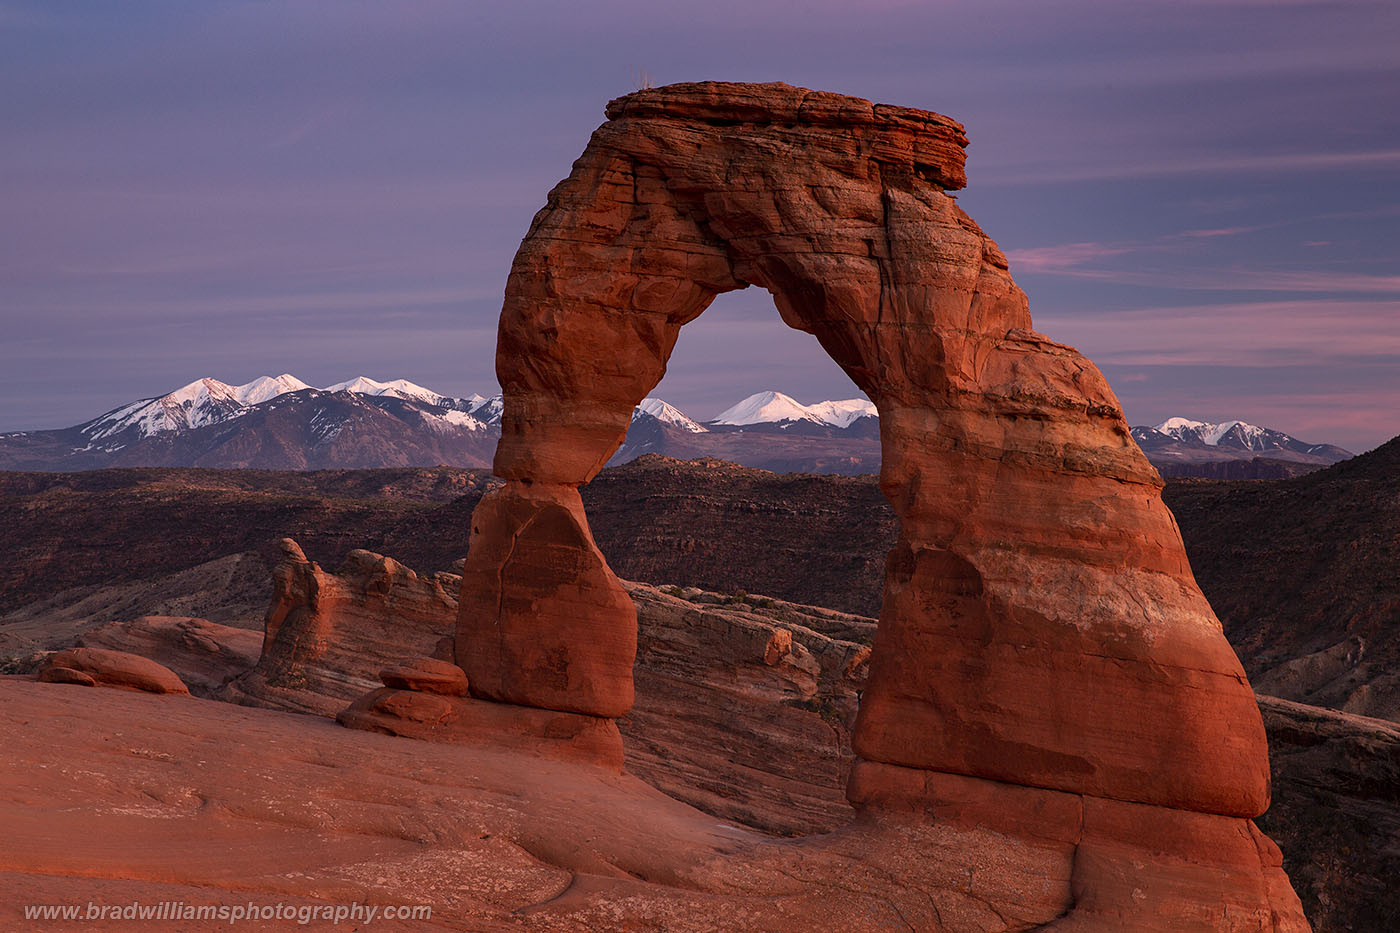 The Icon of Utah, Delicate Arch with the snow capped LaSal Mountains in the background.